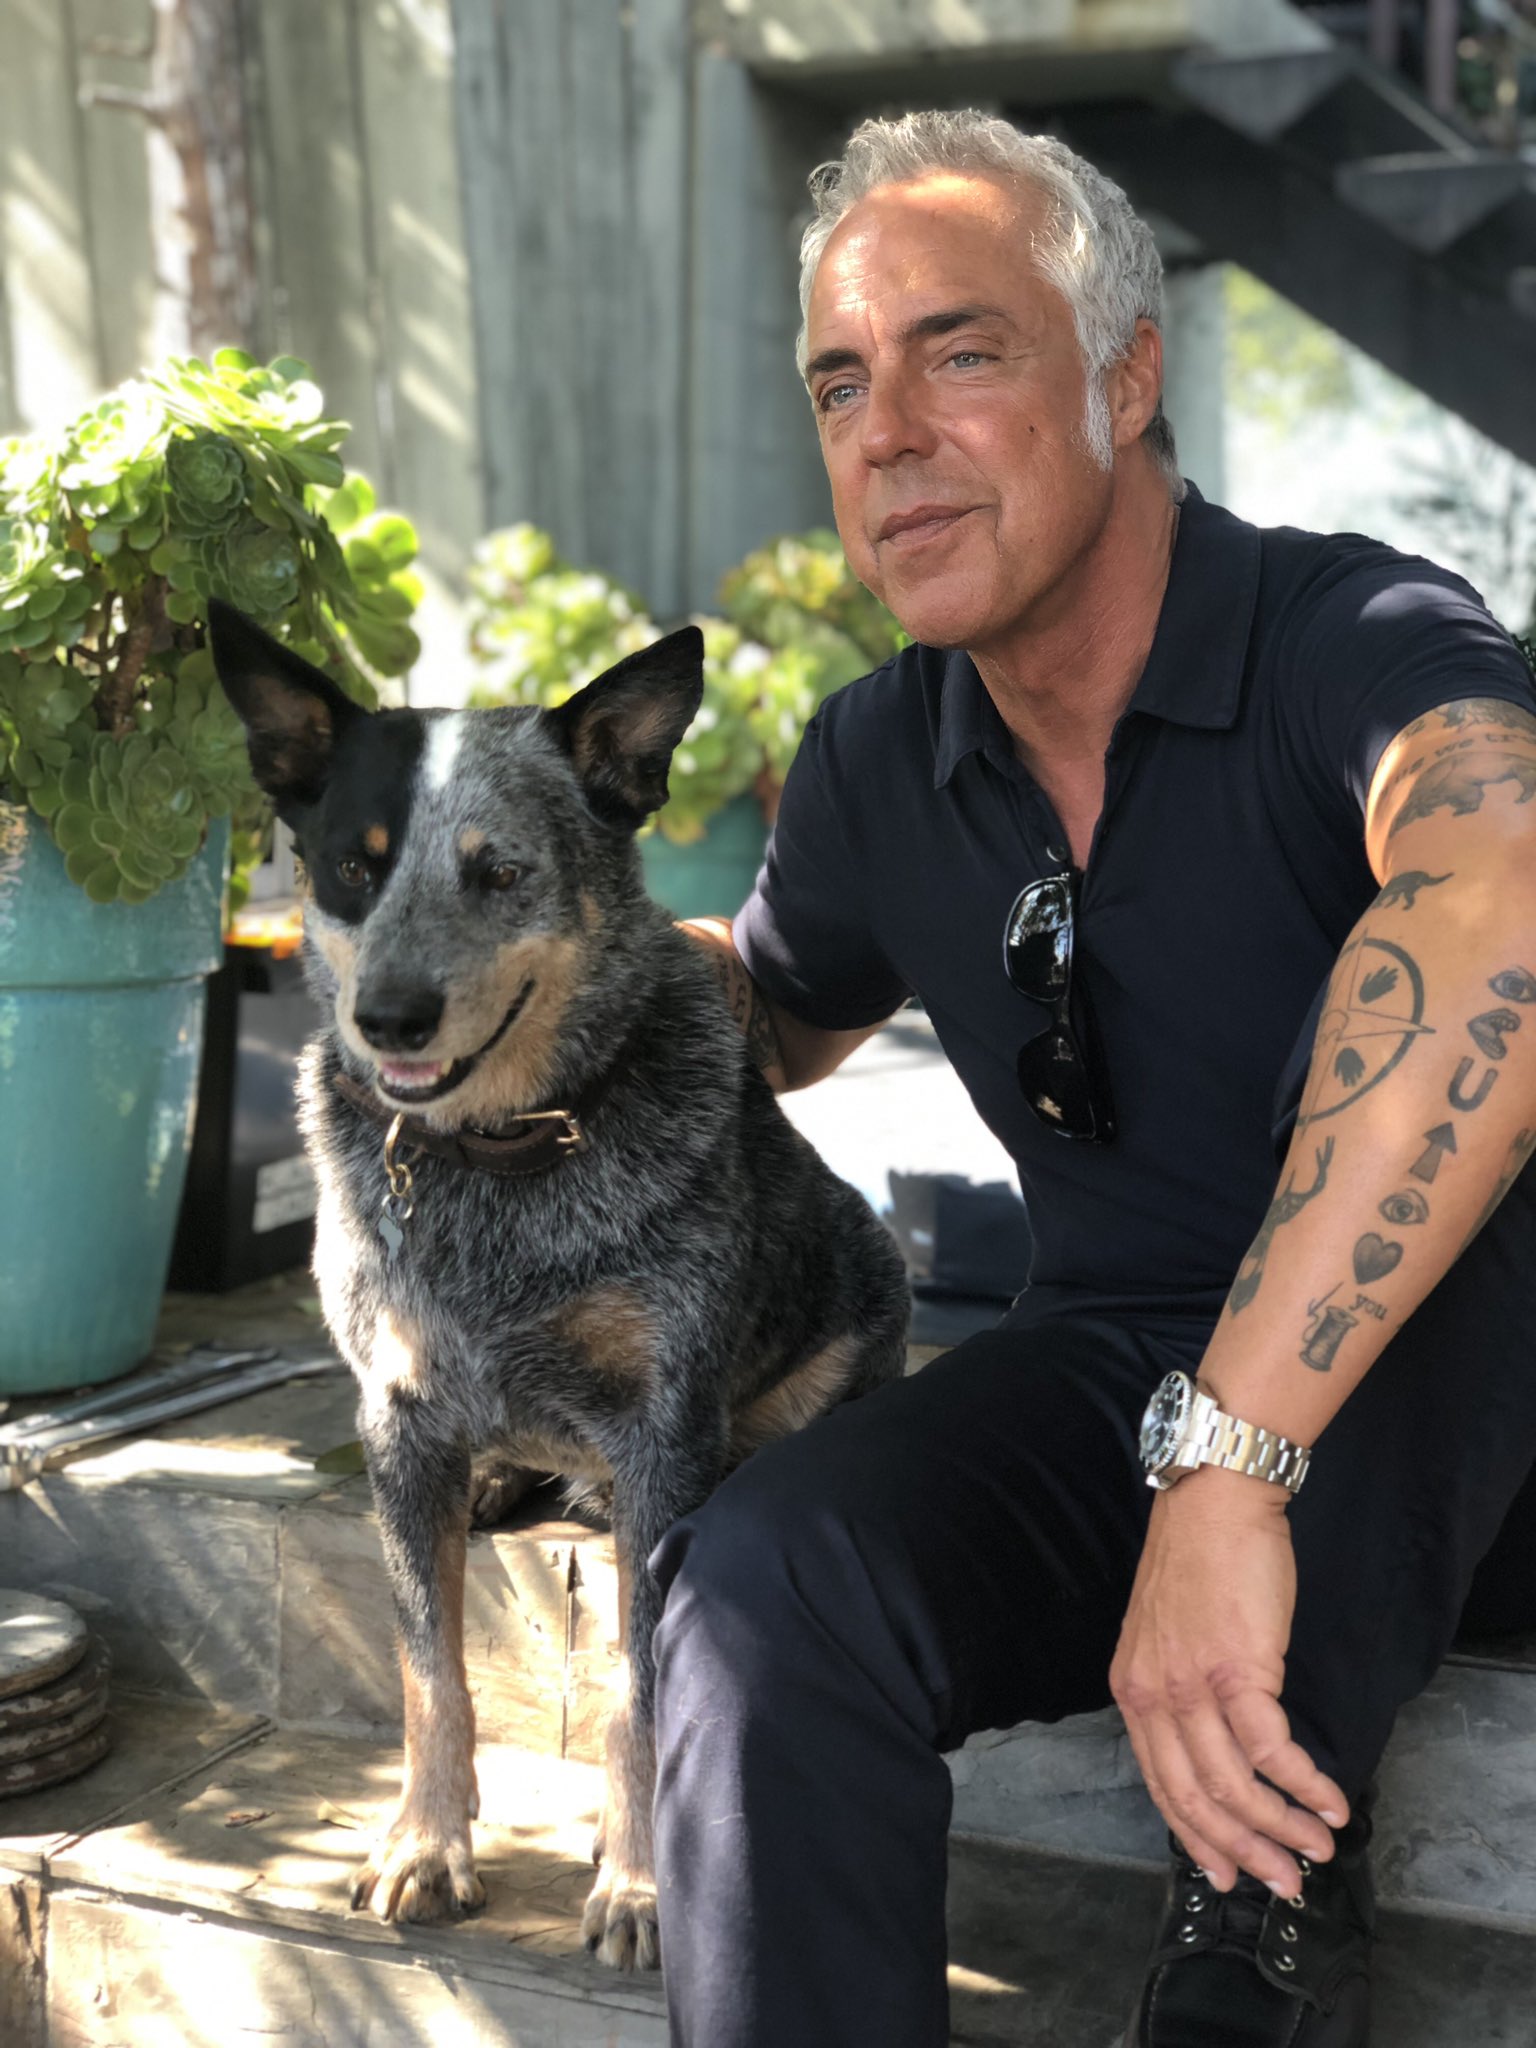 TitusWelliver on Twitter: "Harry and Coltrane reunited. Brodie's first back Bosch 6 https://t.co/Yw1MCi4zAE" / Twitter